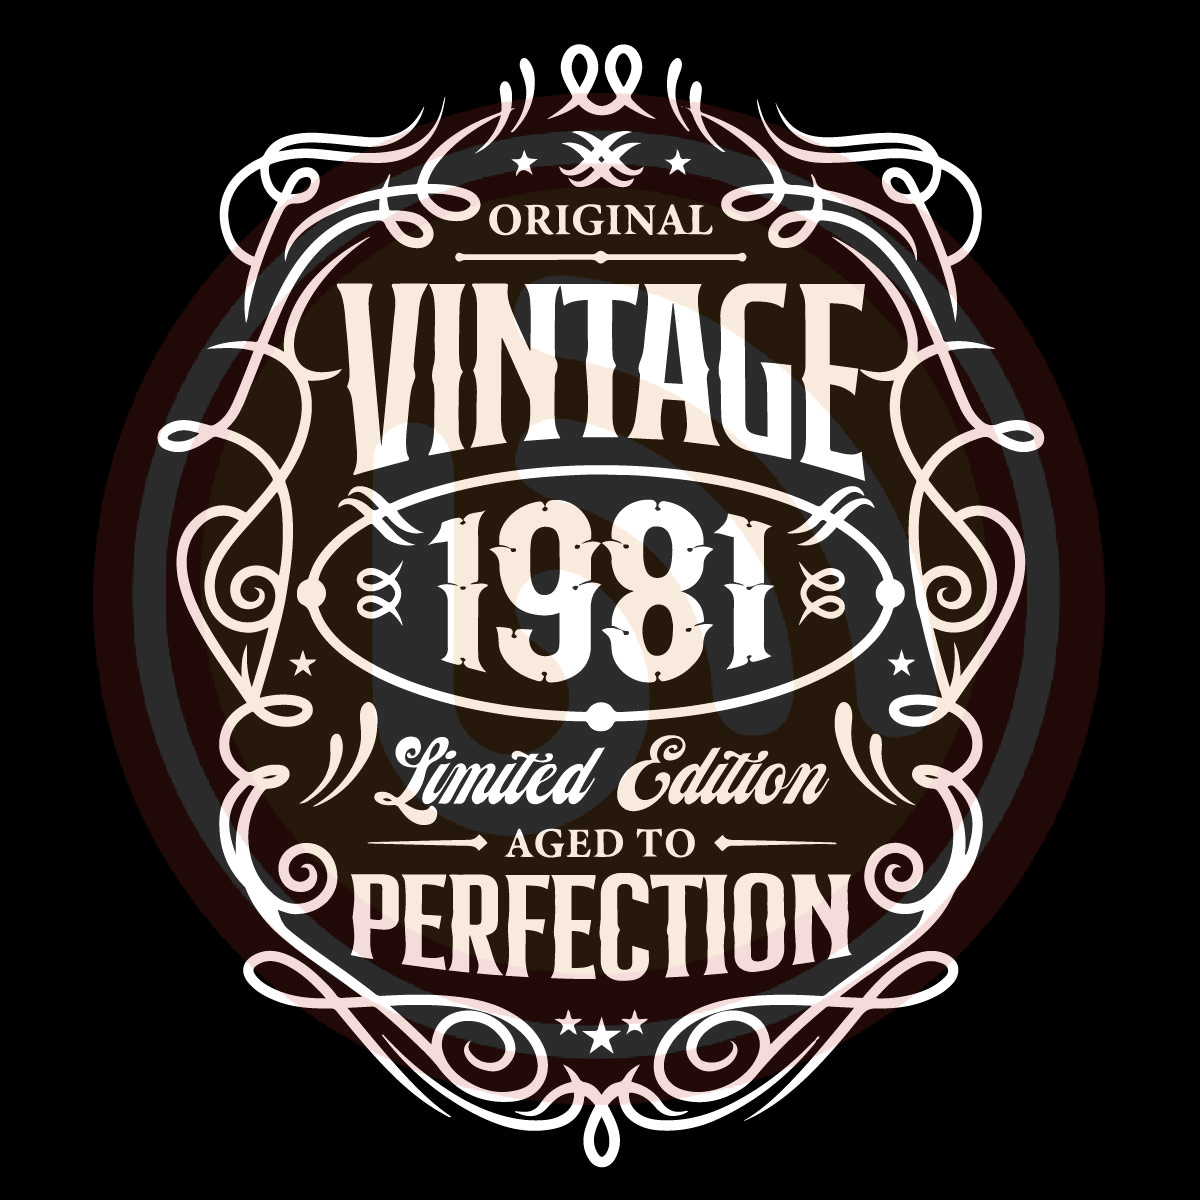 1981 Aged to perfection Digital Download File